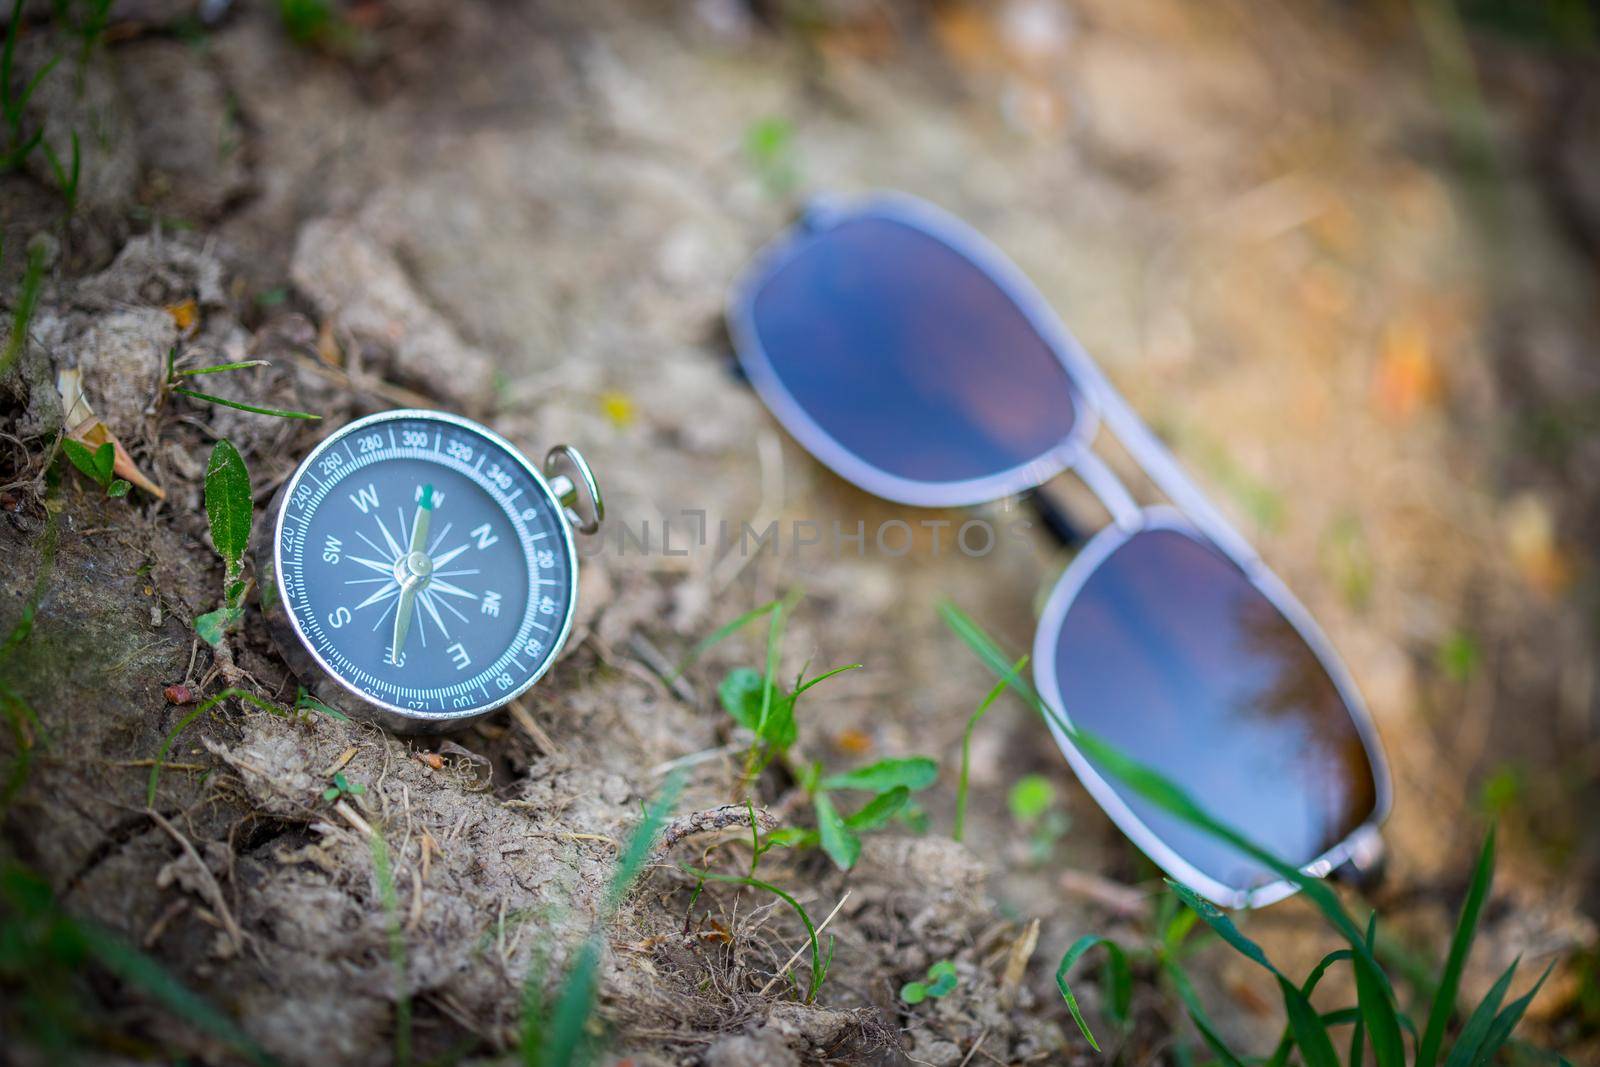 Adventure: Compass and sunglasses are lying on the floor, showing the direction by Daxenbichler